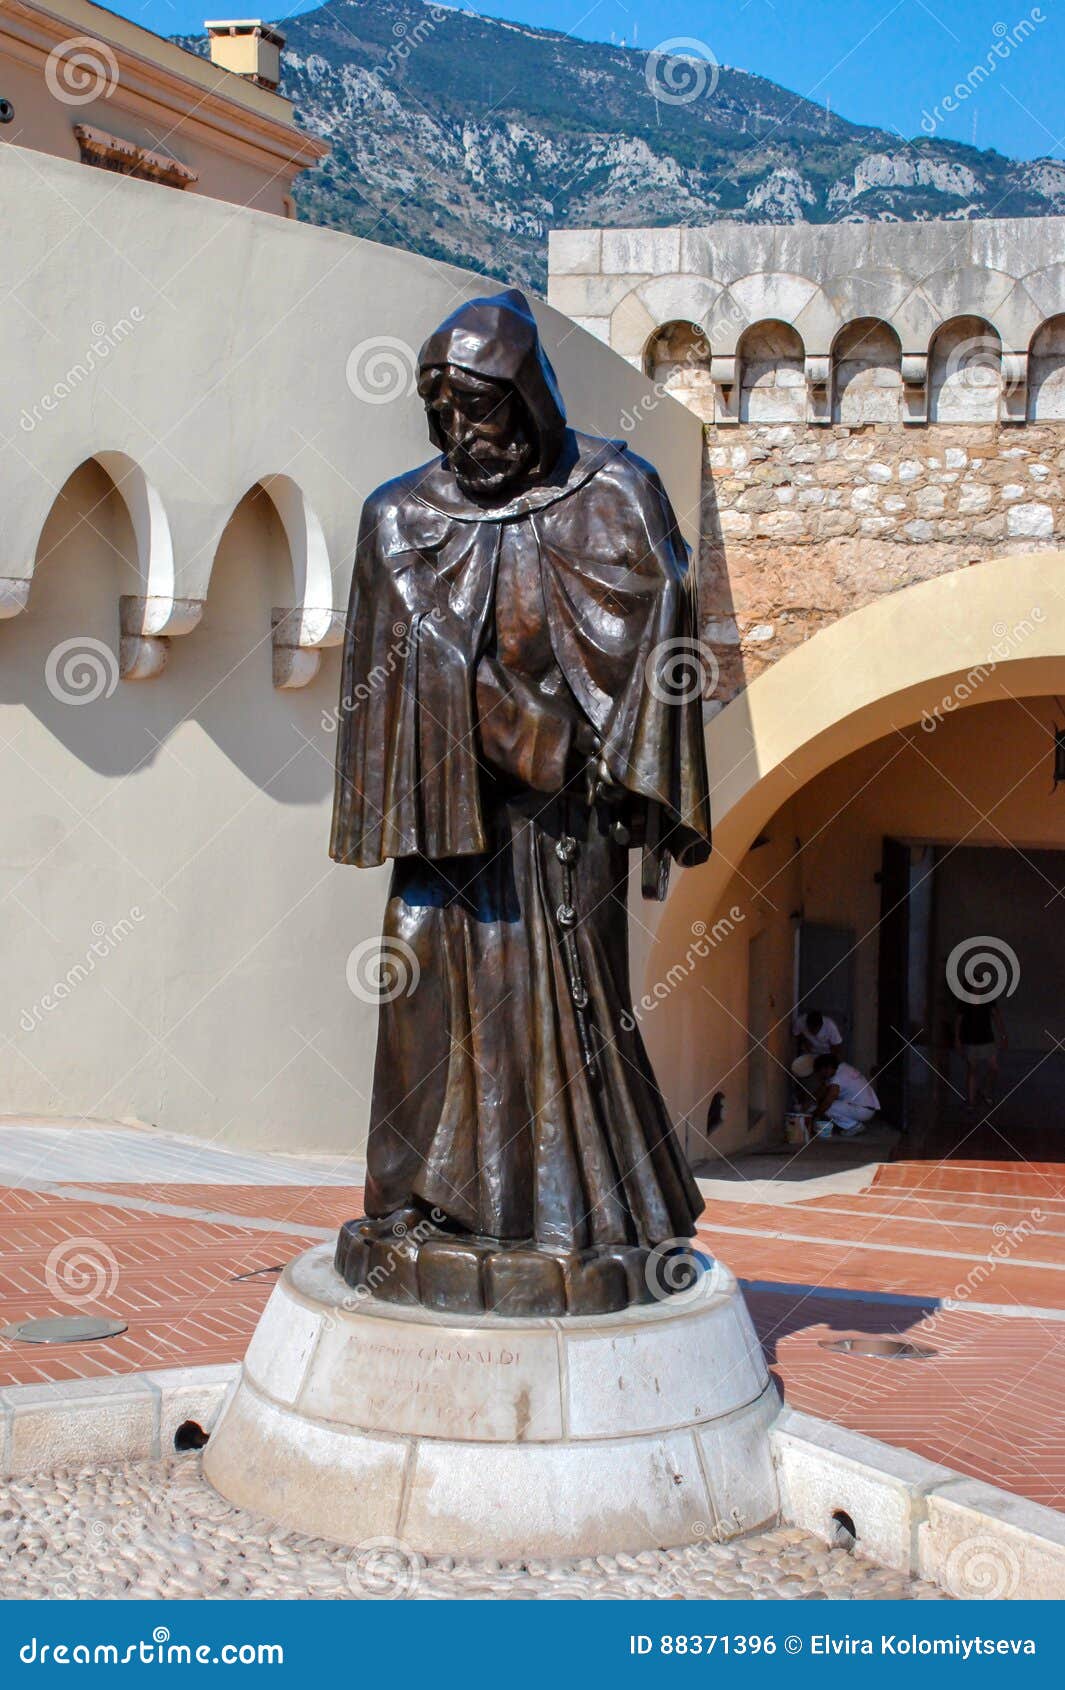 statue of the monk in front of the royal palace in the state mon